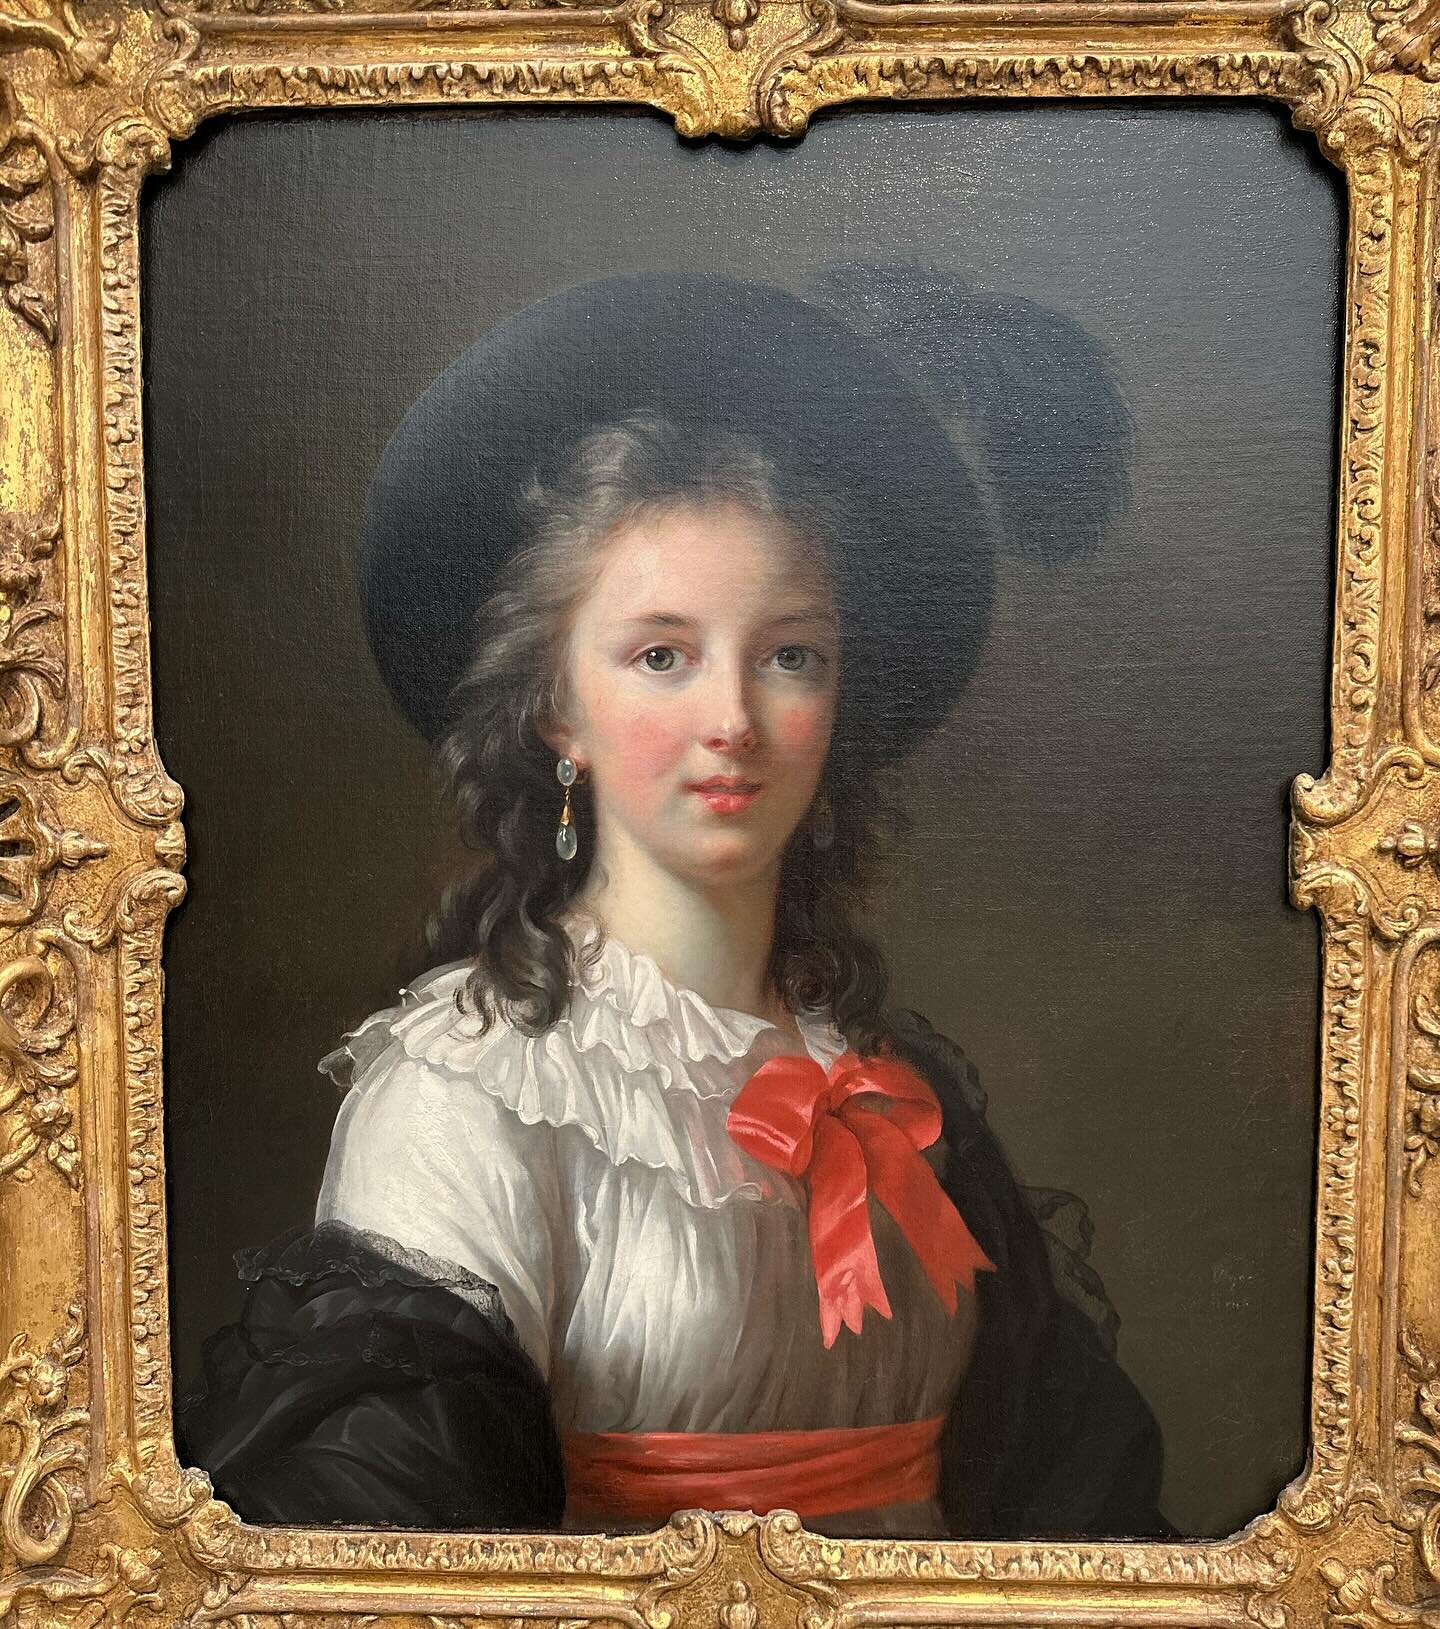 ELISABETH LOUISE VIG&Eacute;E LE BRUN
French, 1755-1842
Self-Portrait
c. 1781
Oil on canvas
Acquired in 1949
@kimbellartmuseum 
One of two artist women on view in permanent collection ❤️